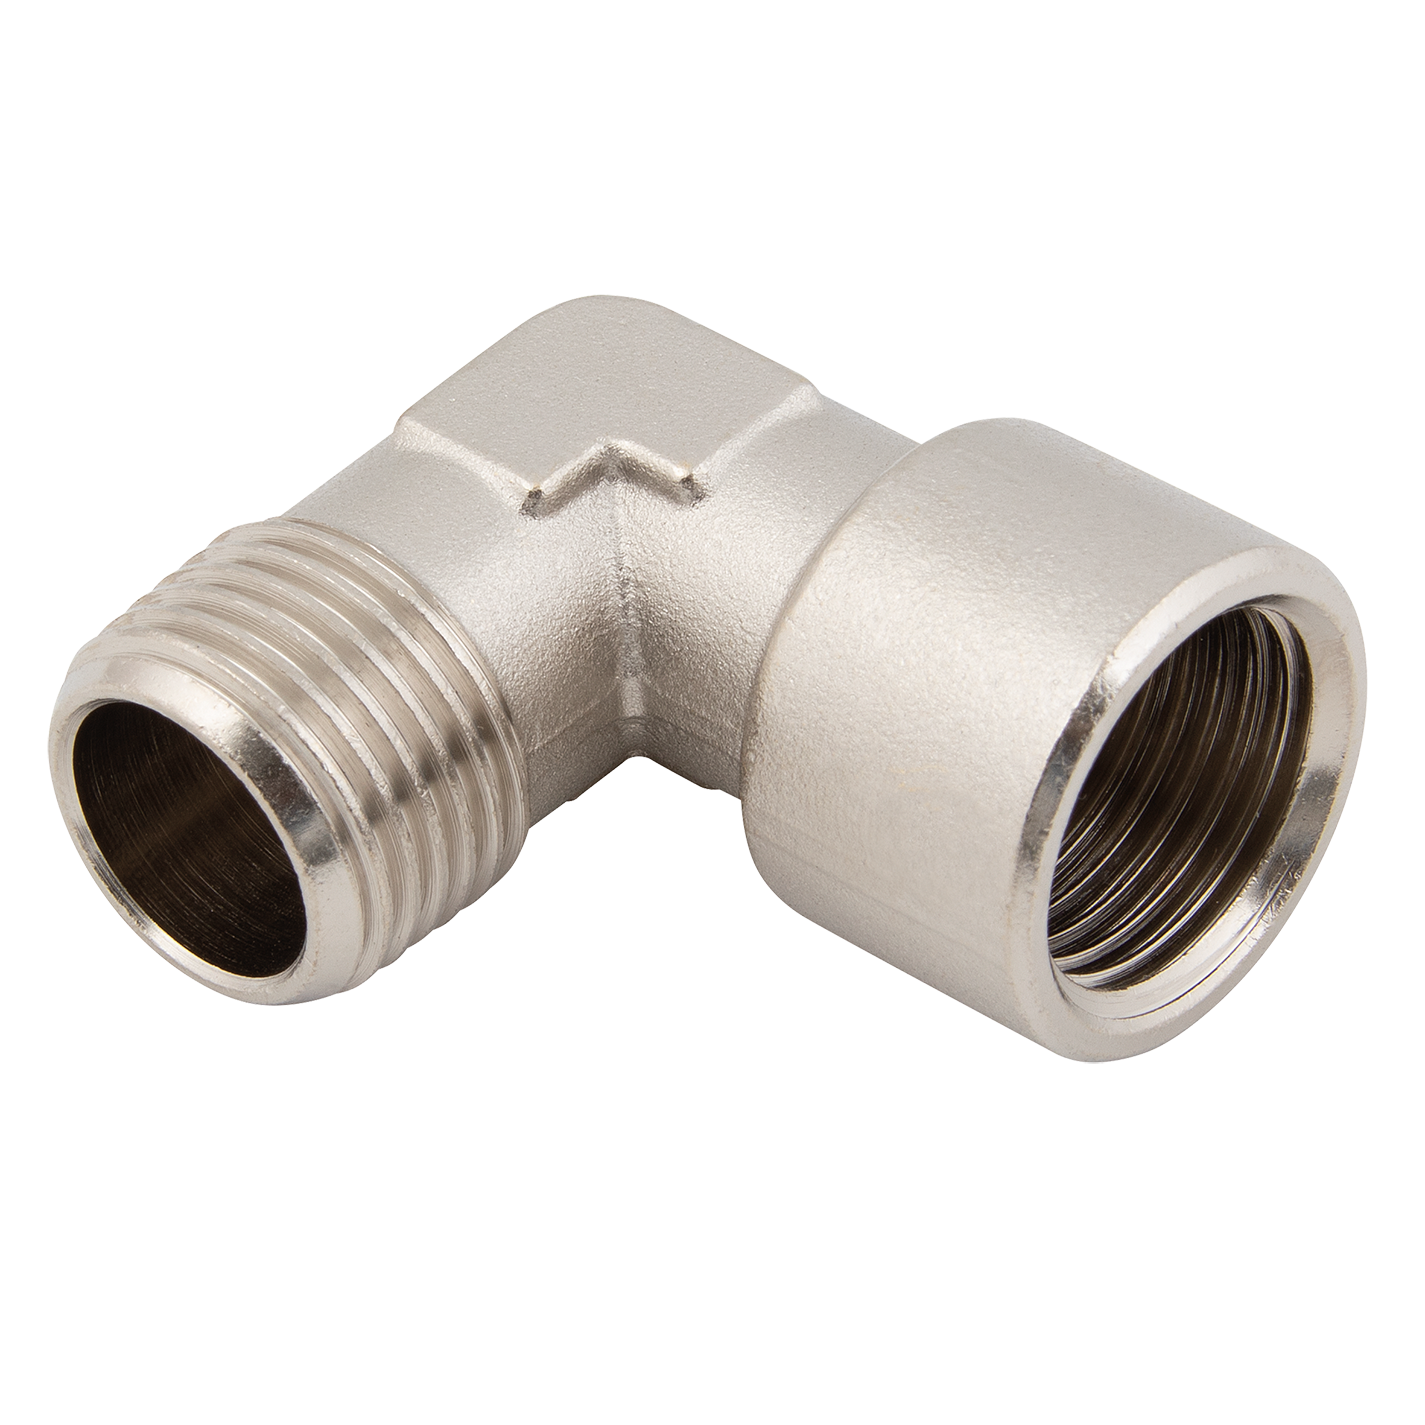 1/4" BSPT Male x 1/4" BSPP Female Equal Elbow